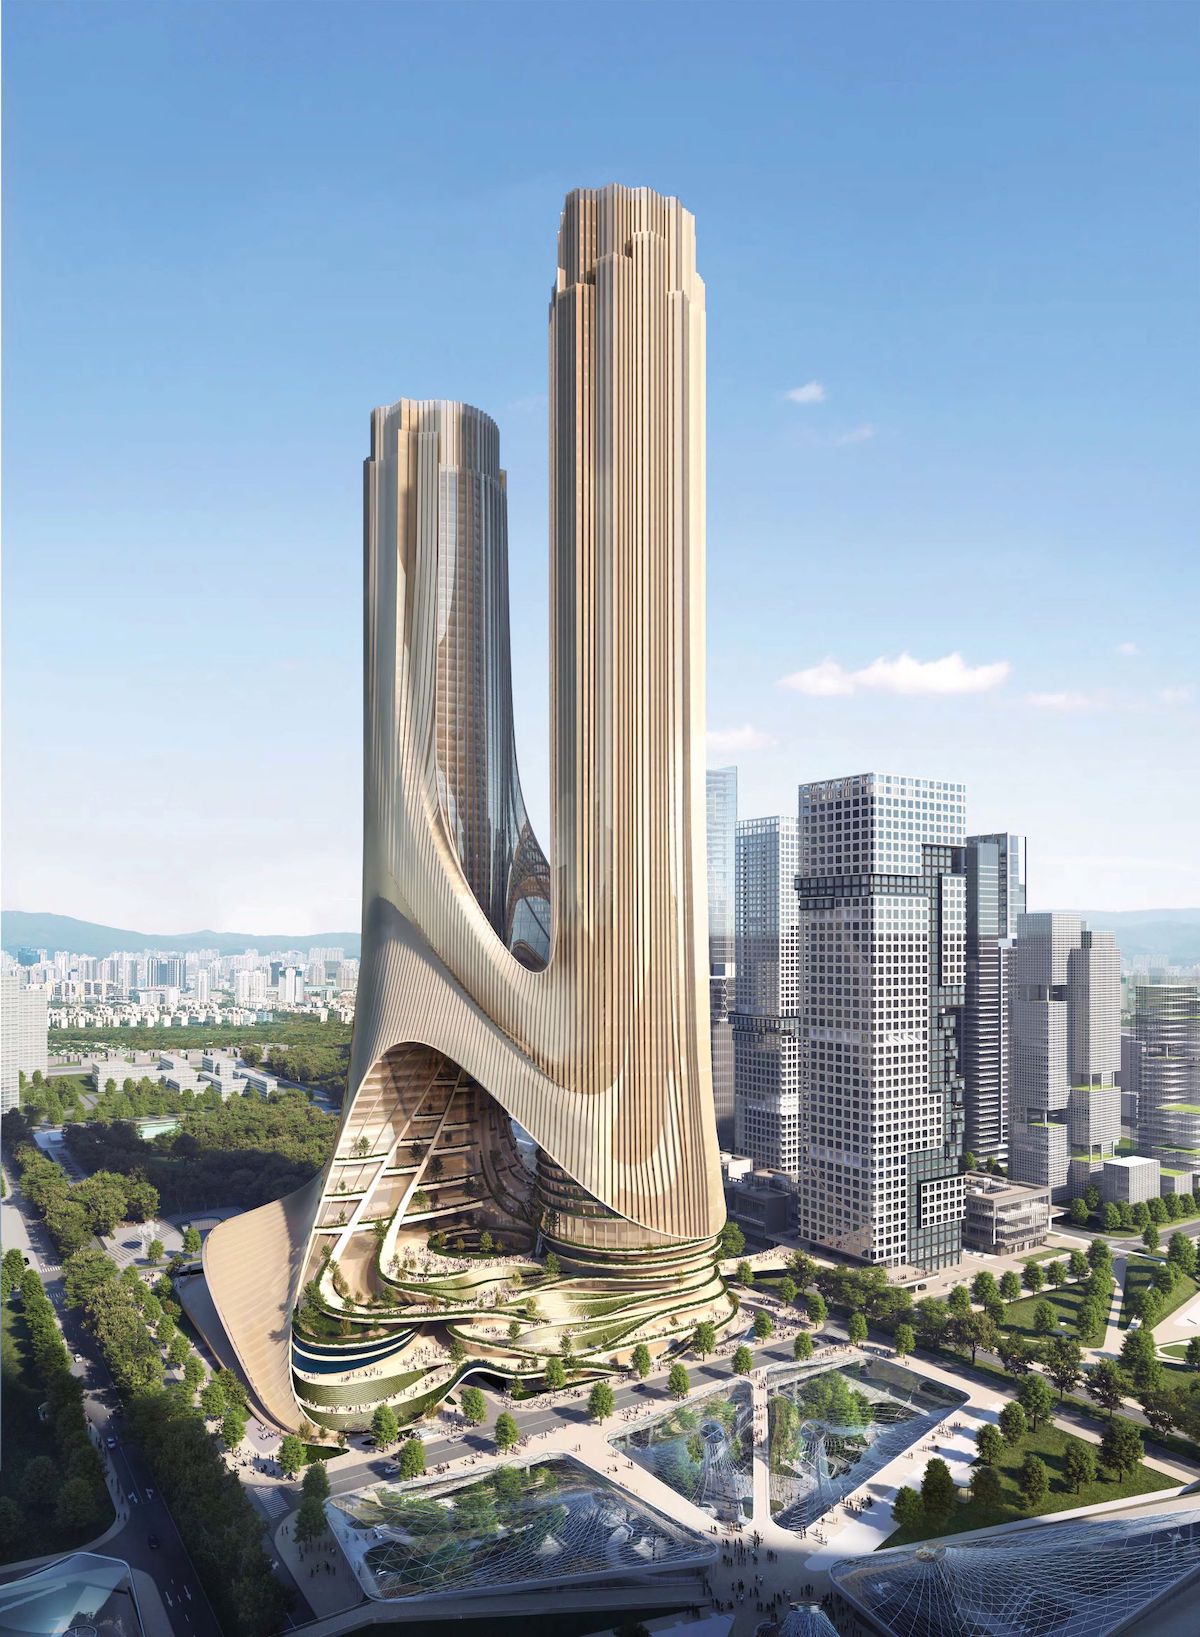 Zaha Hadid Architects Wins Tower Competition for Shenzhen Bay